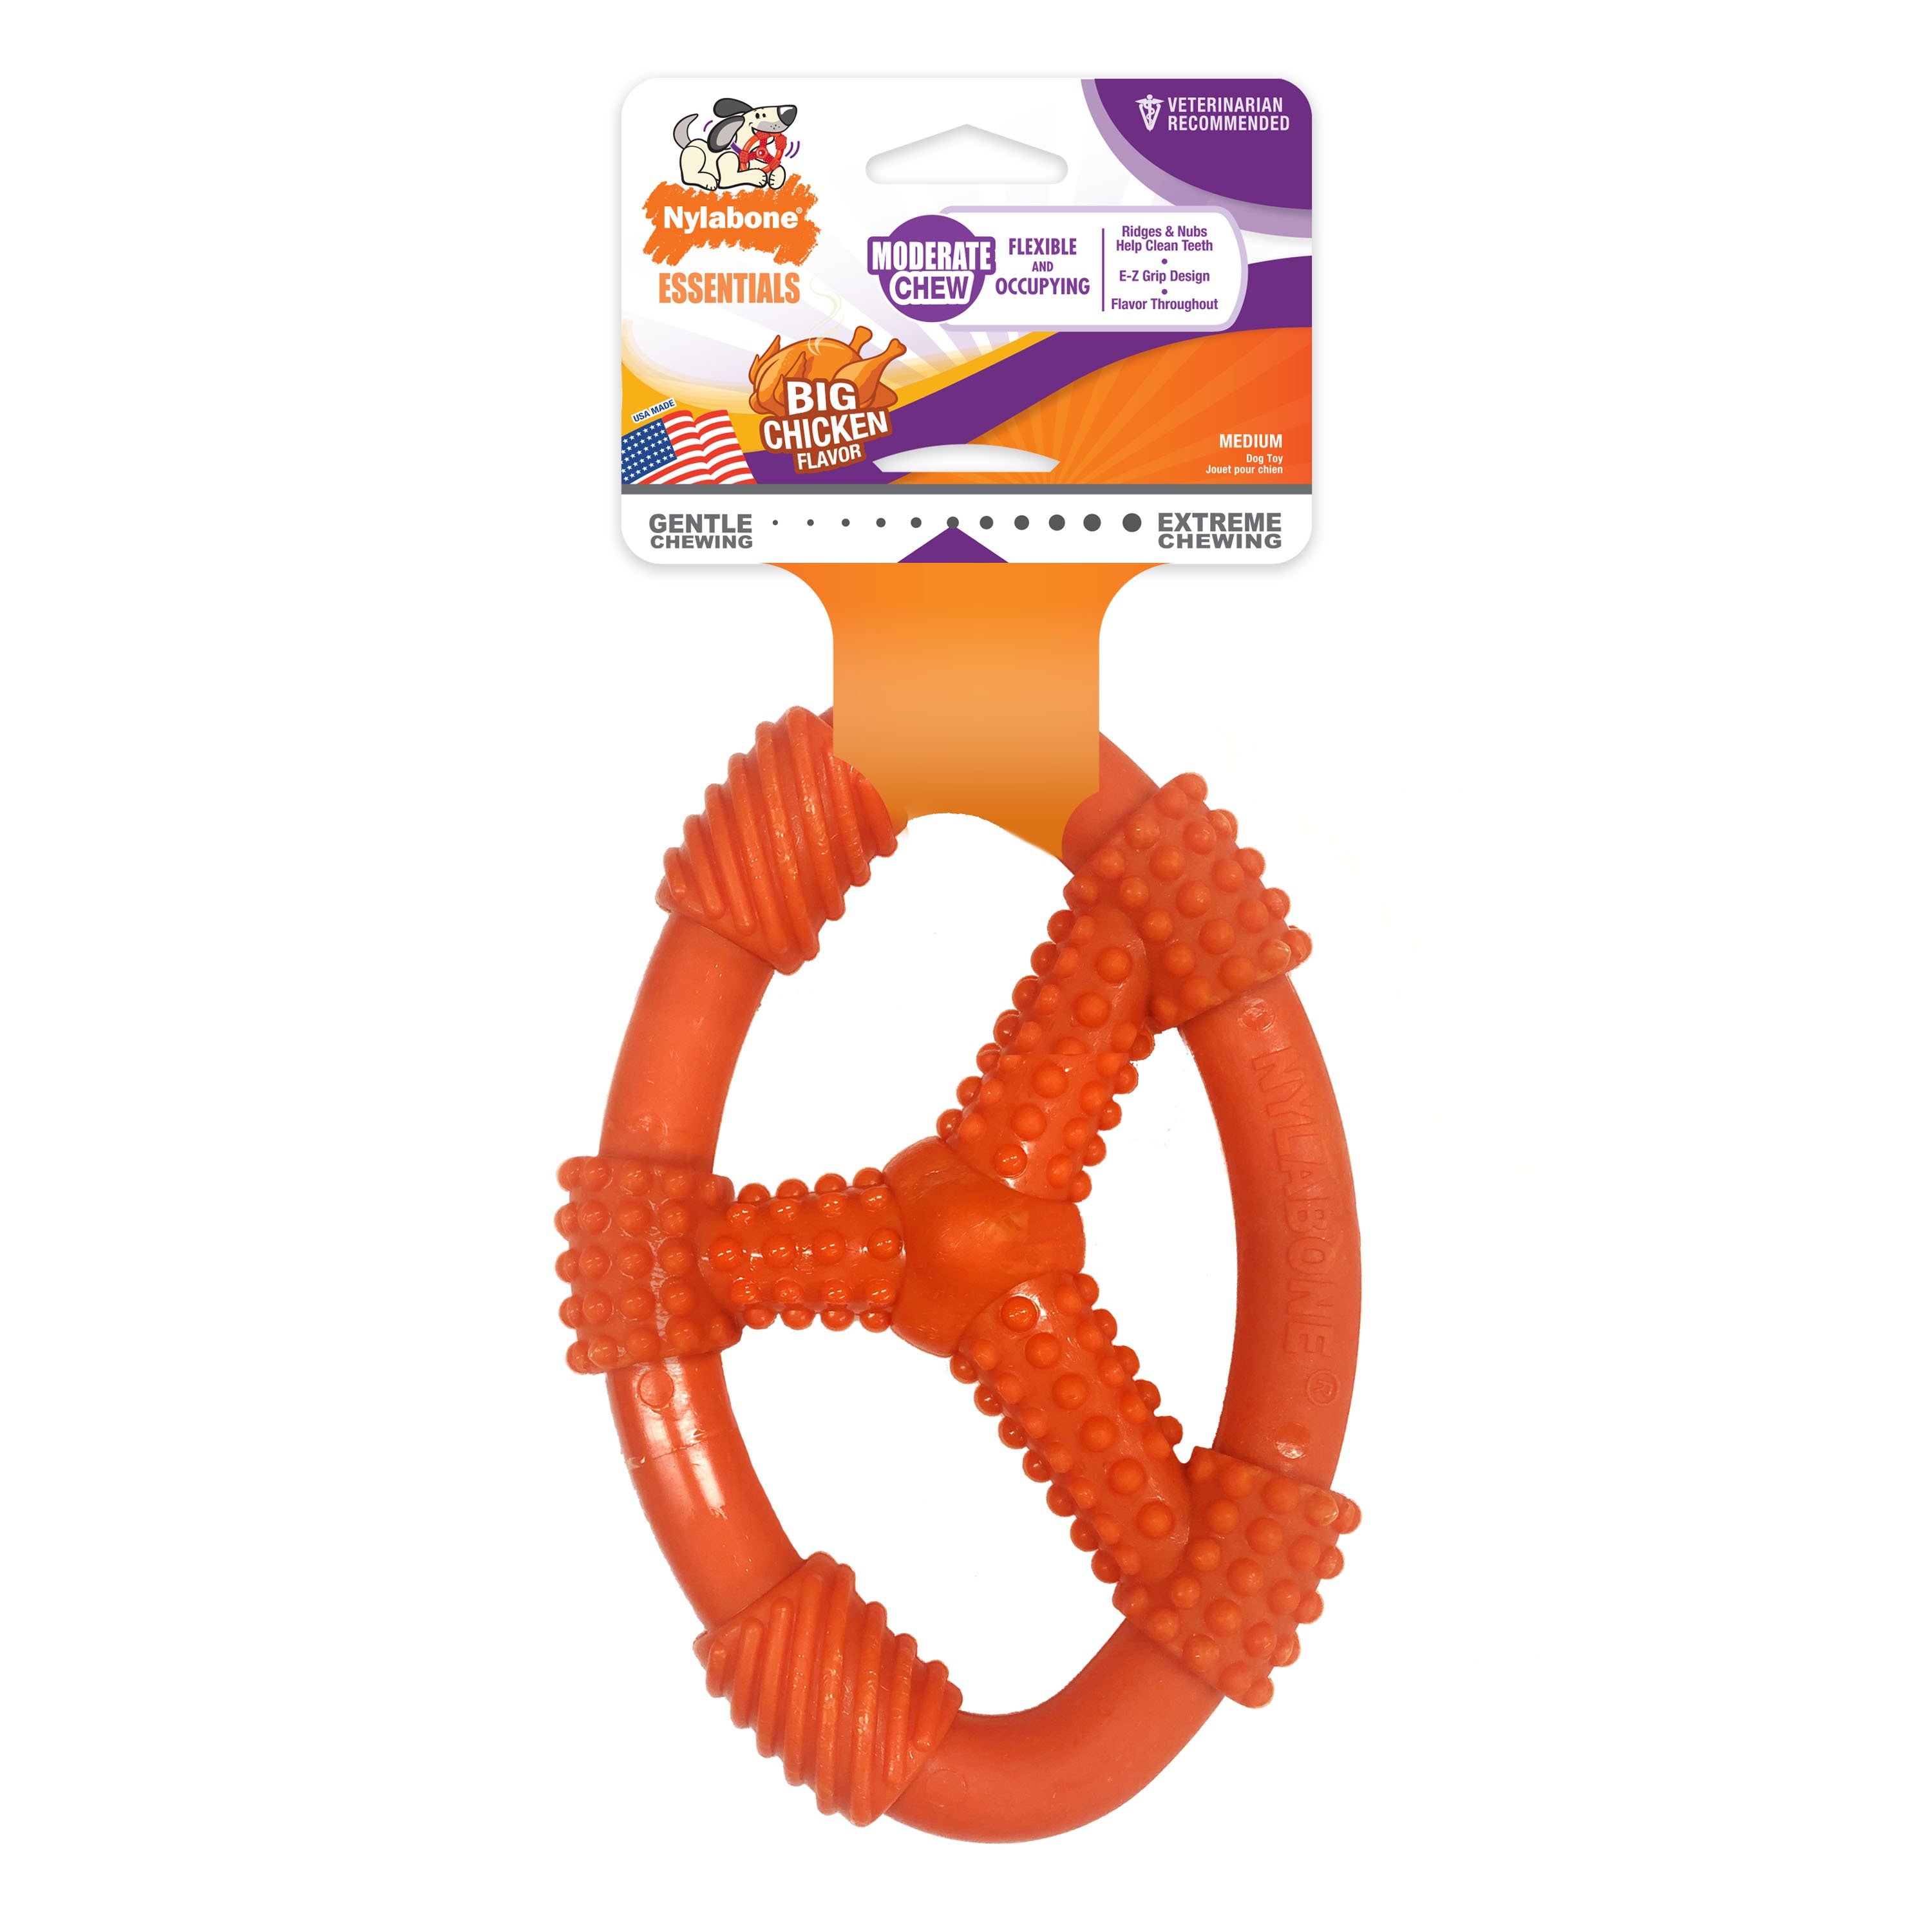 Busy Toys for Dogs That Are Fillable 